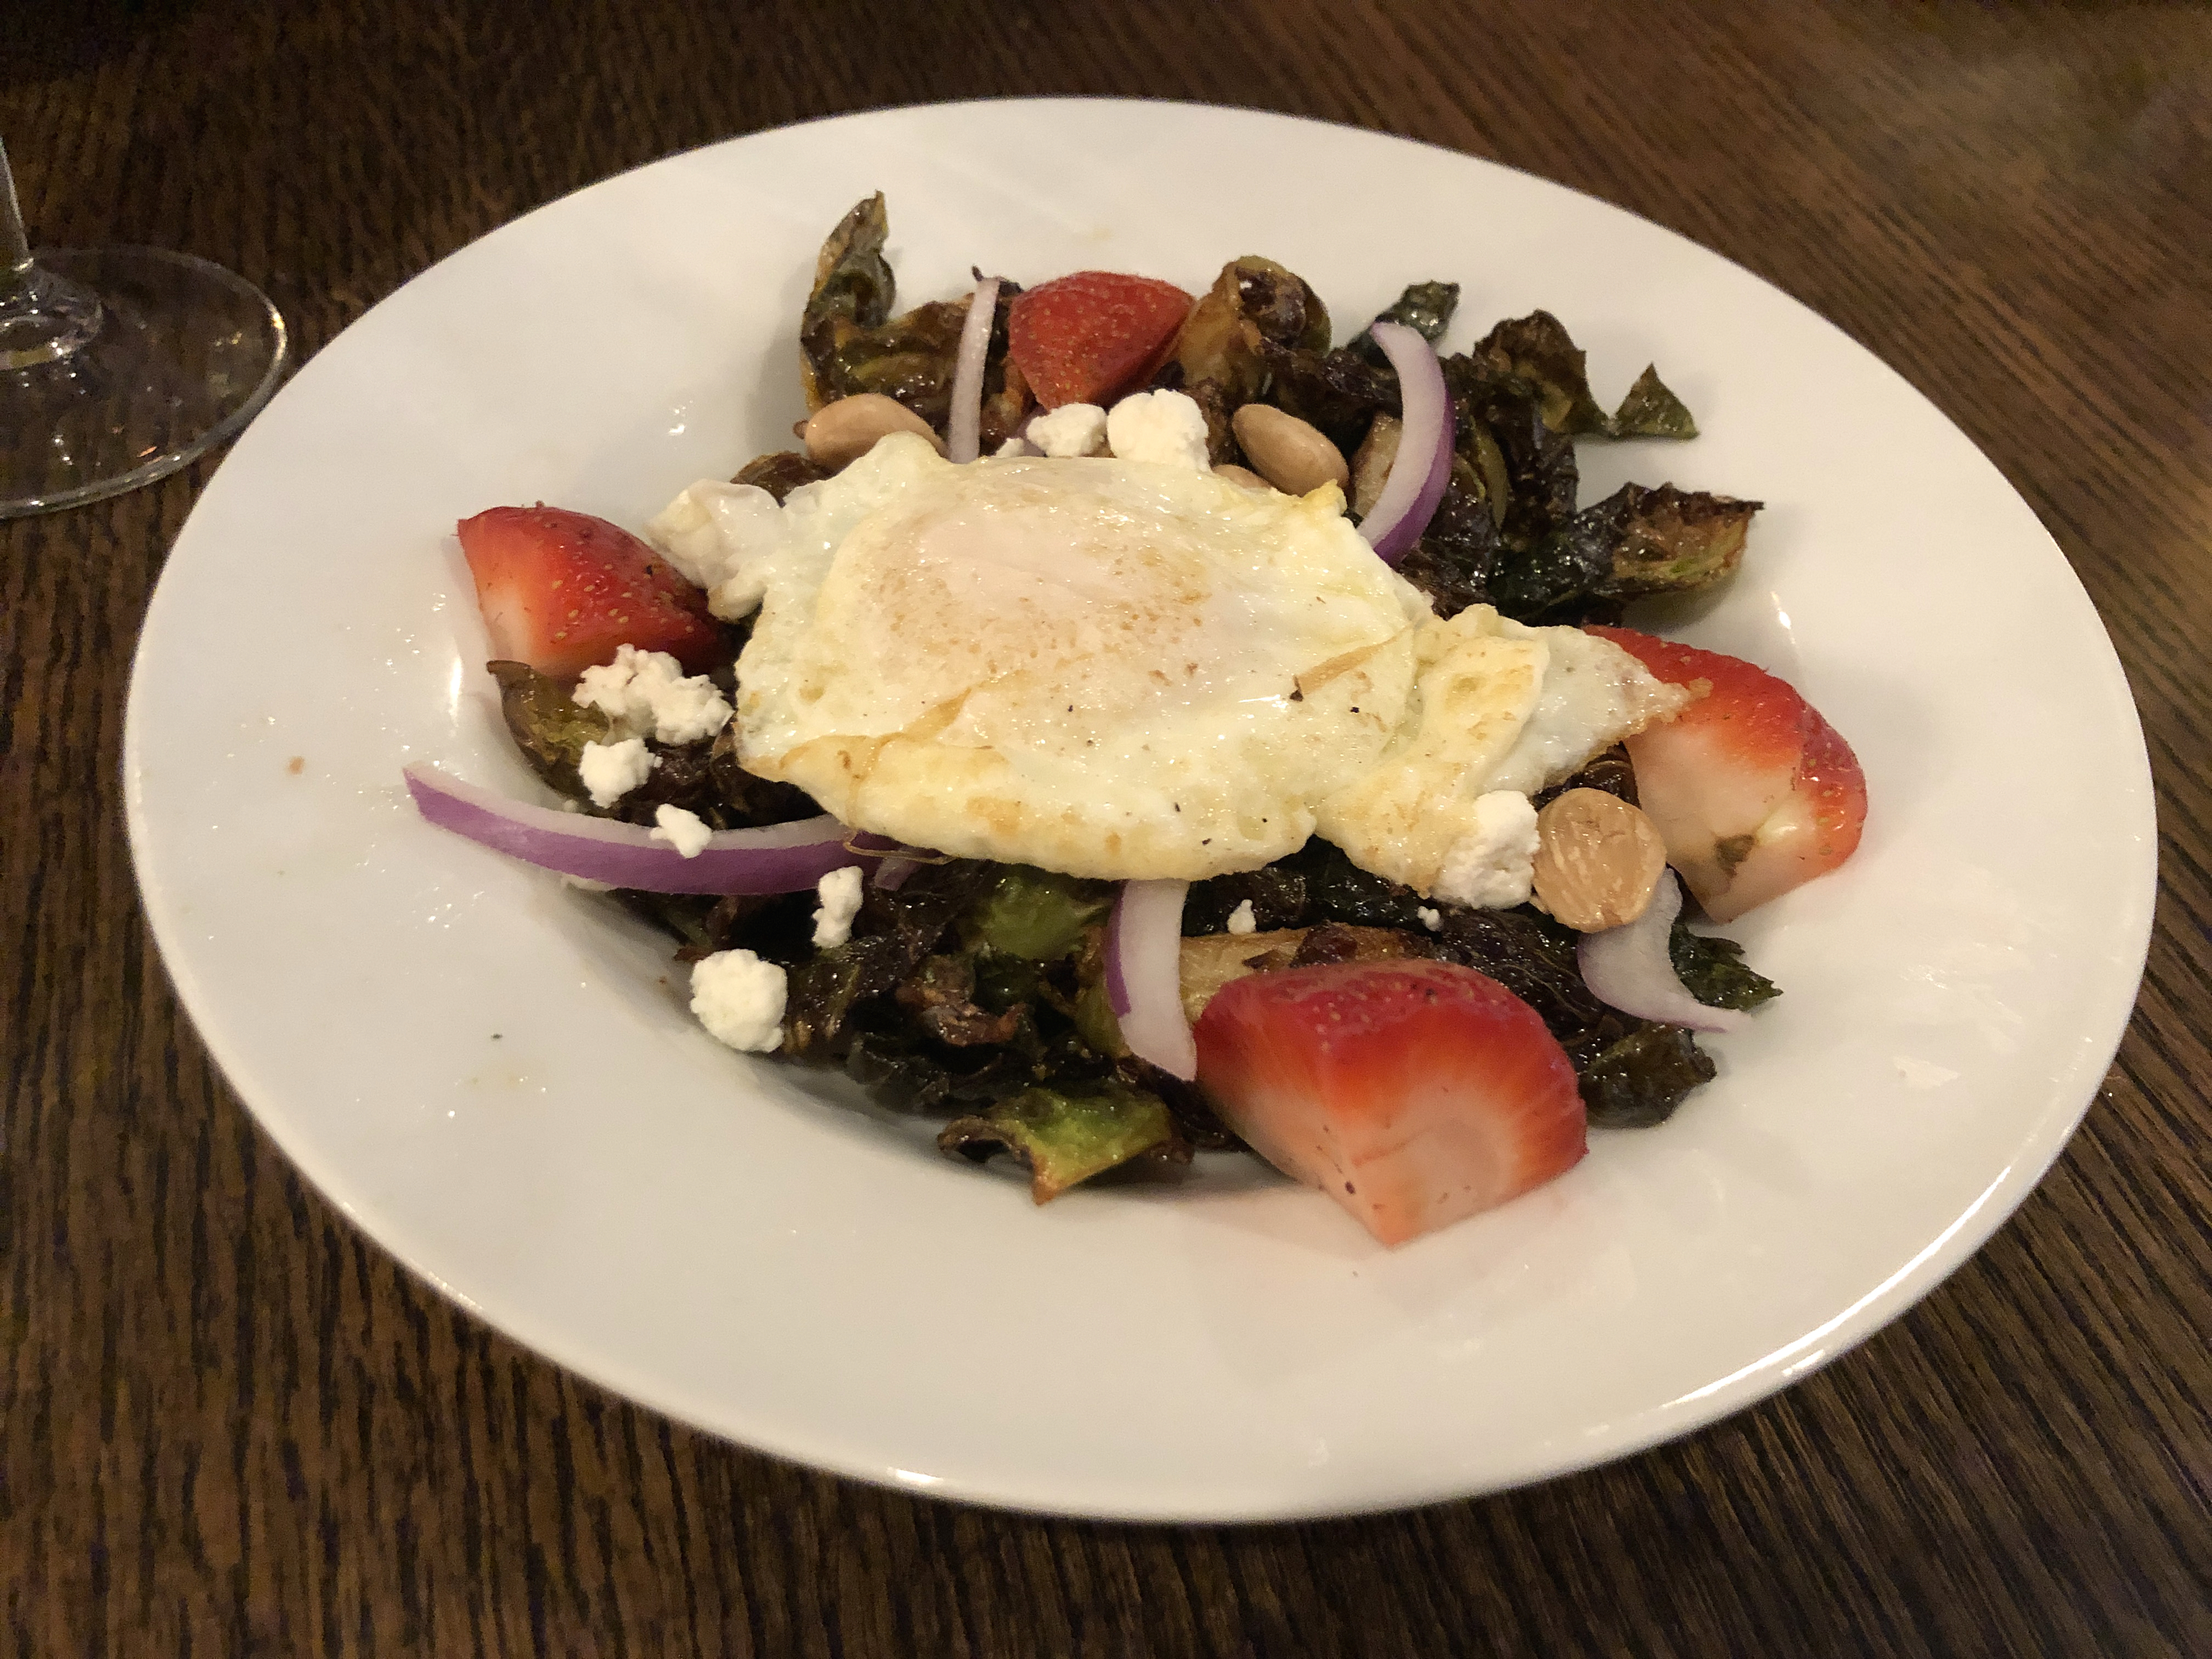 How to improve brussels sprouts: Fry them and put a fried egg on top! Also goat cheese, marcona almonds, and other good things at Fork & Barrel's brunch.